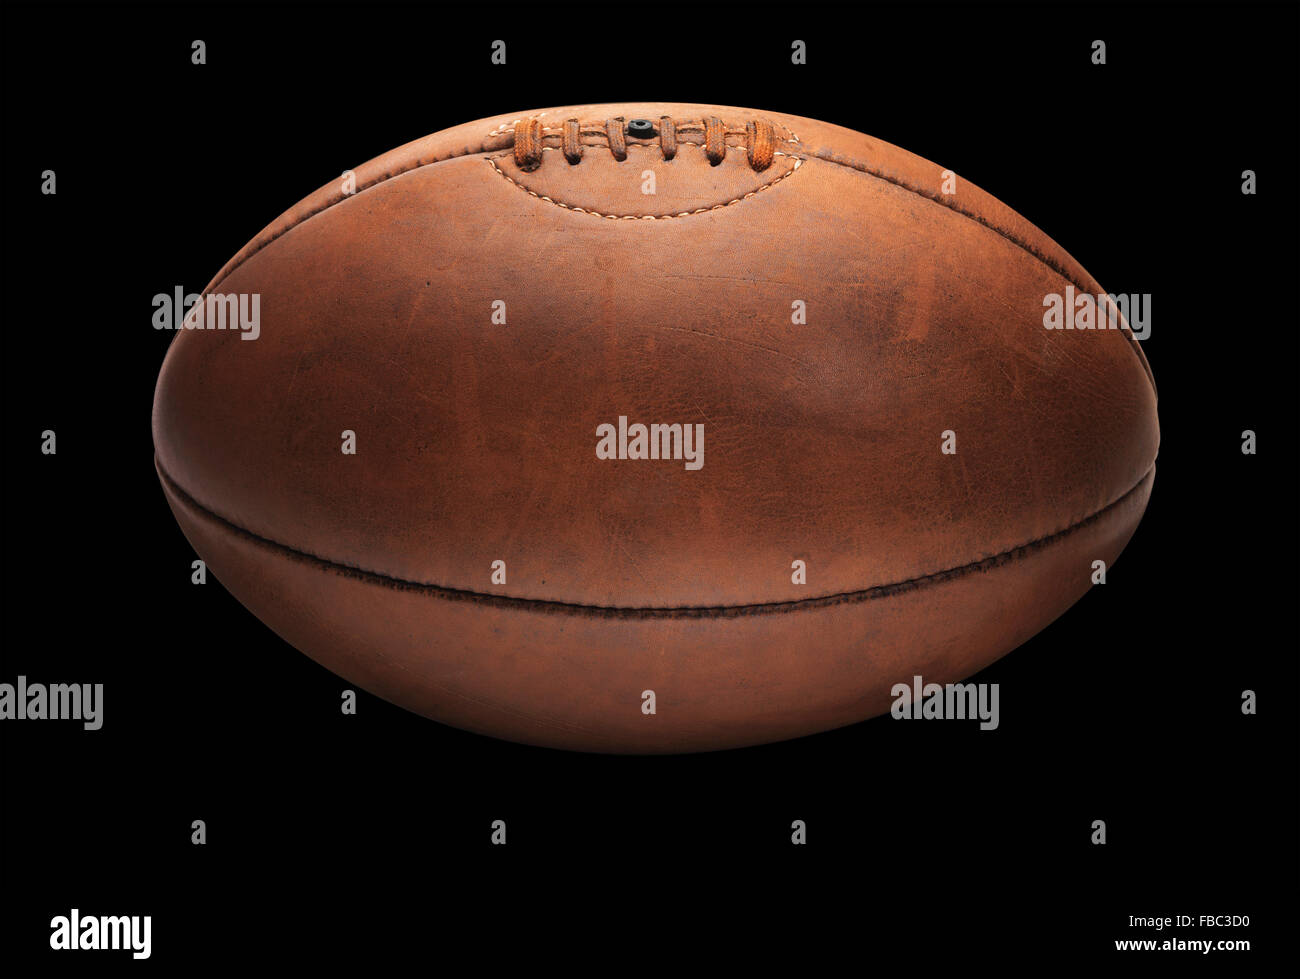 Vintage Tan Old Rugby Ball on Black Stock Photo